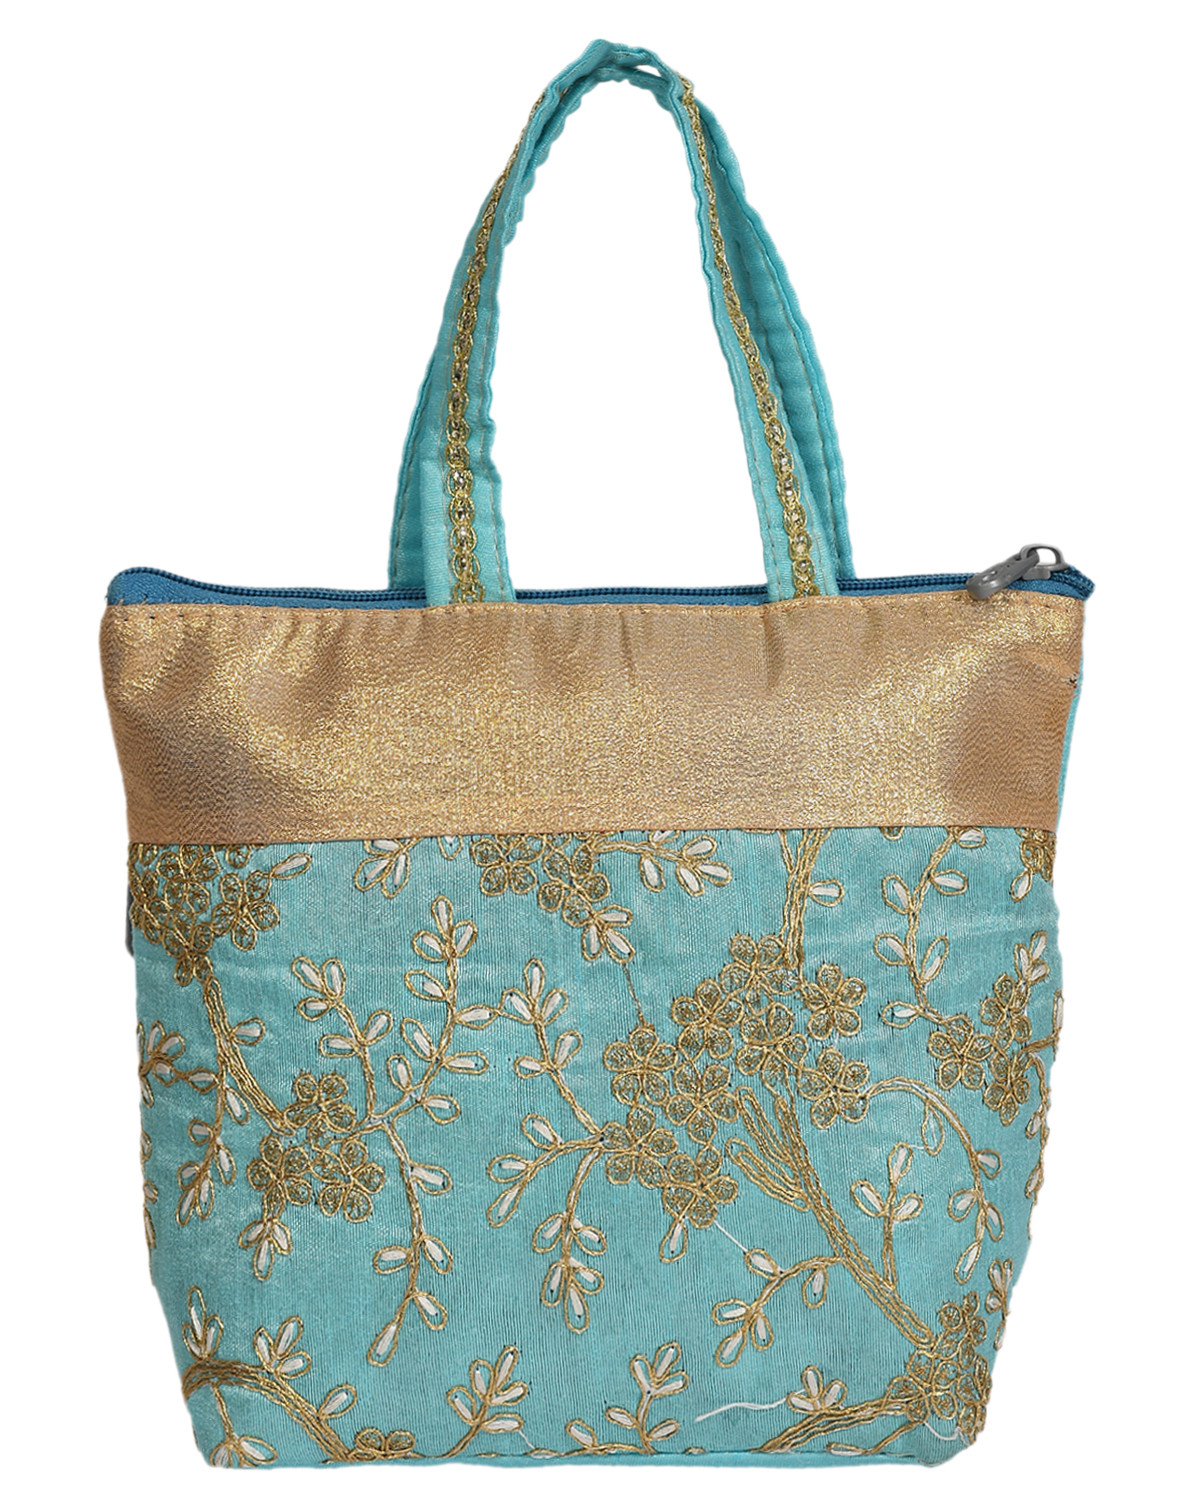 Kuber Industries Polyester Embroidery Design Hand Bag For Women/Girls With Handle (Blue) 54KM4030